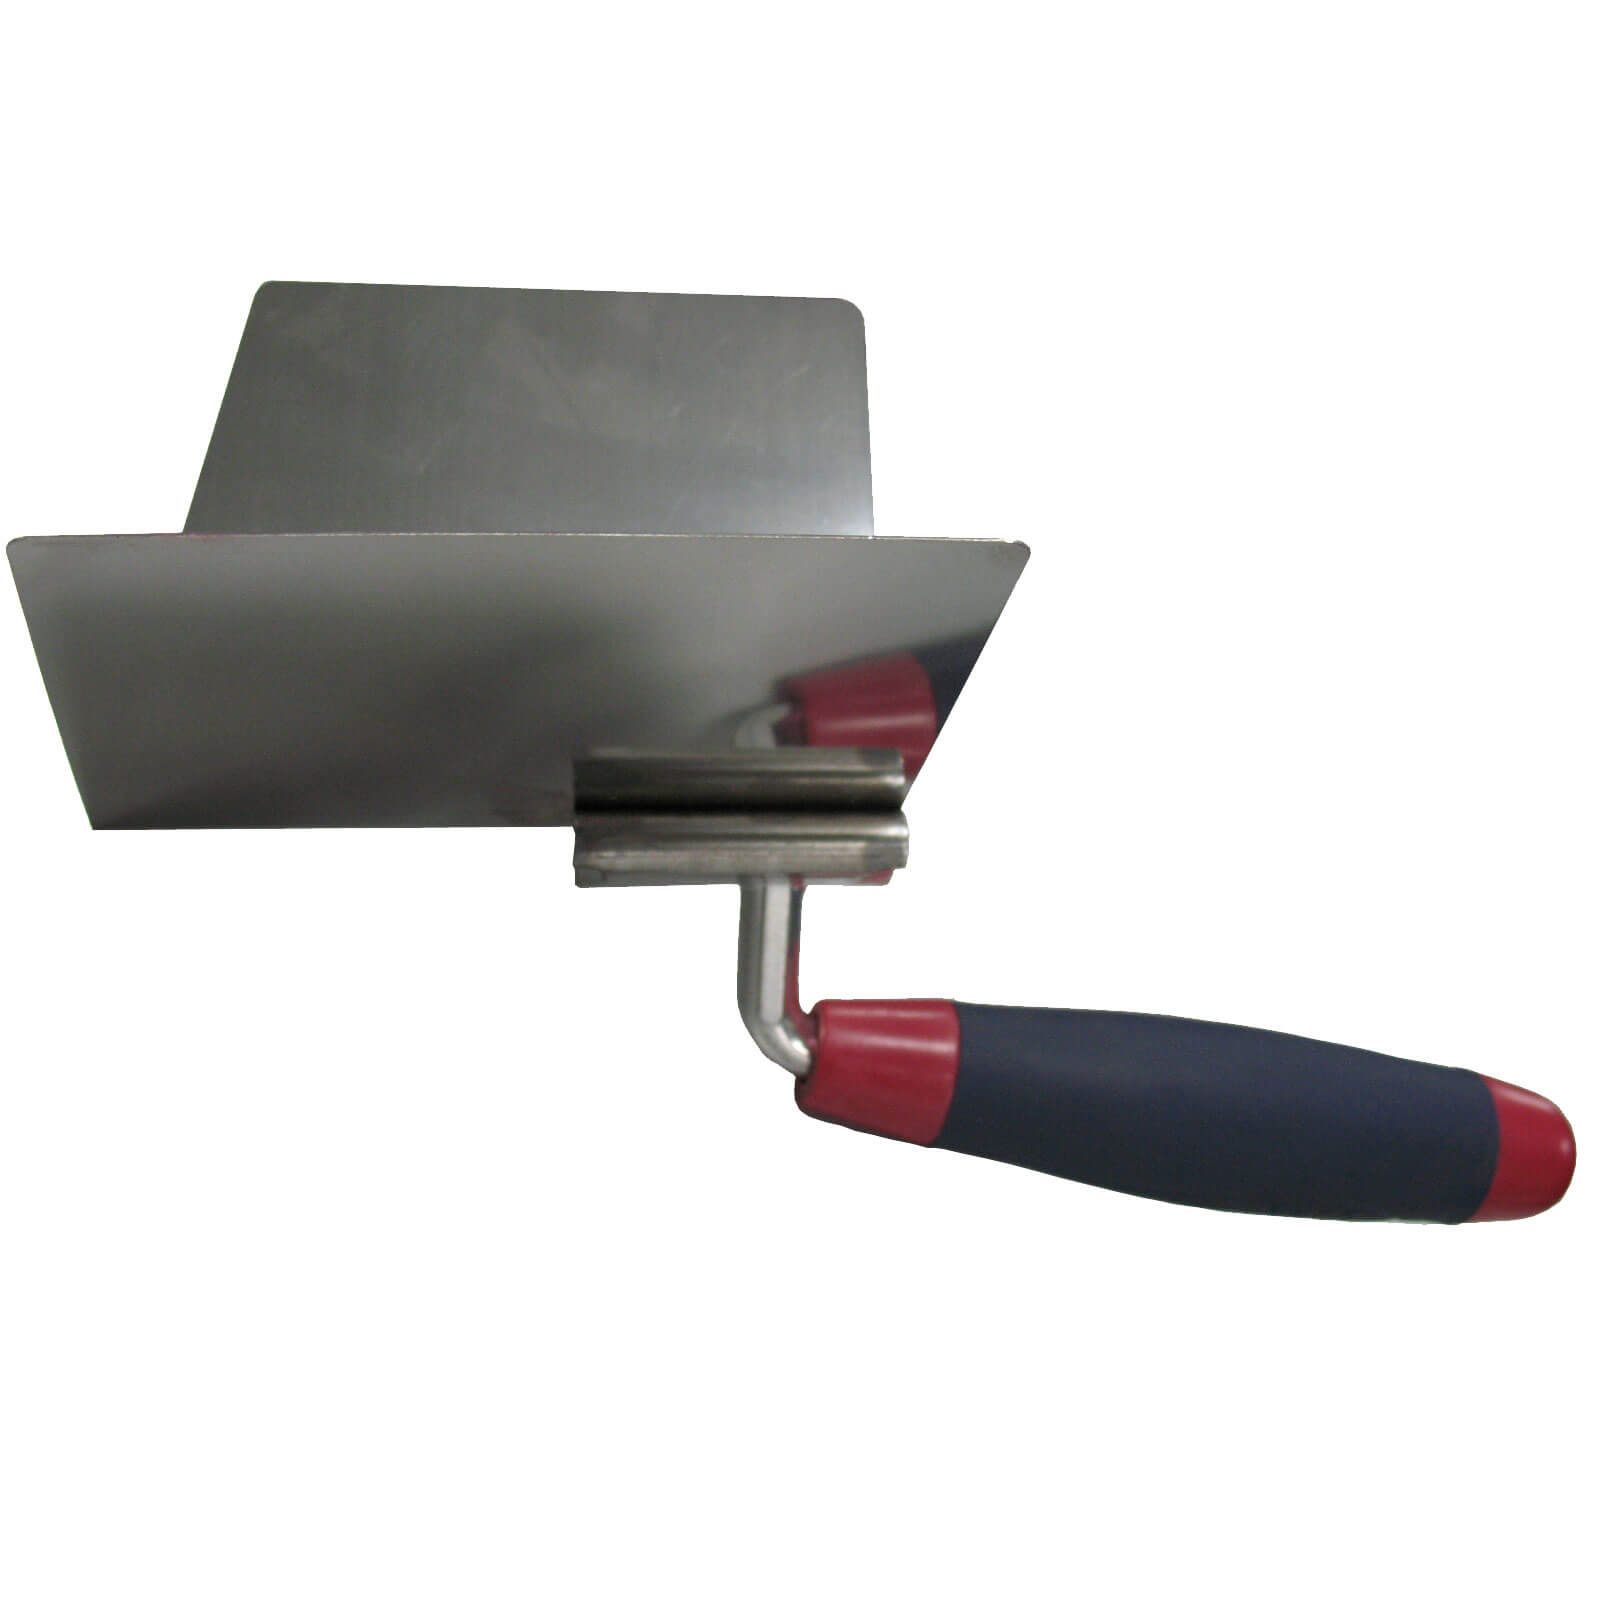 Photos - Other Hand Tools Spear & Jackson Tyzack Dry Lining External Corner Trowel 715C-05 